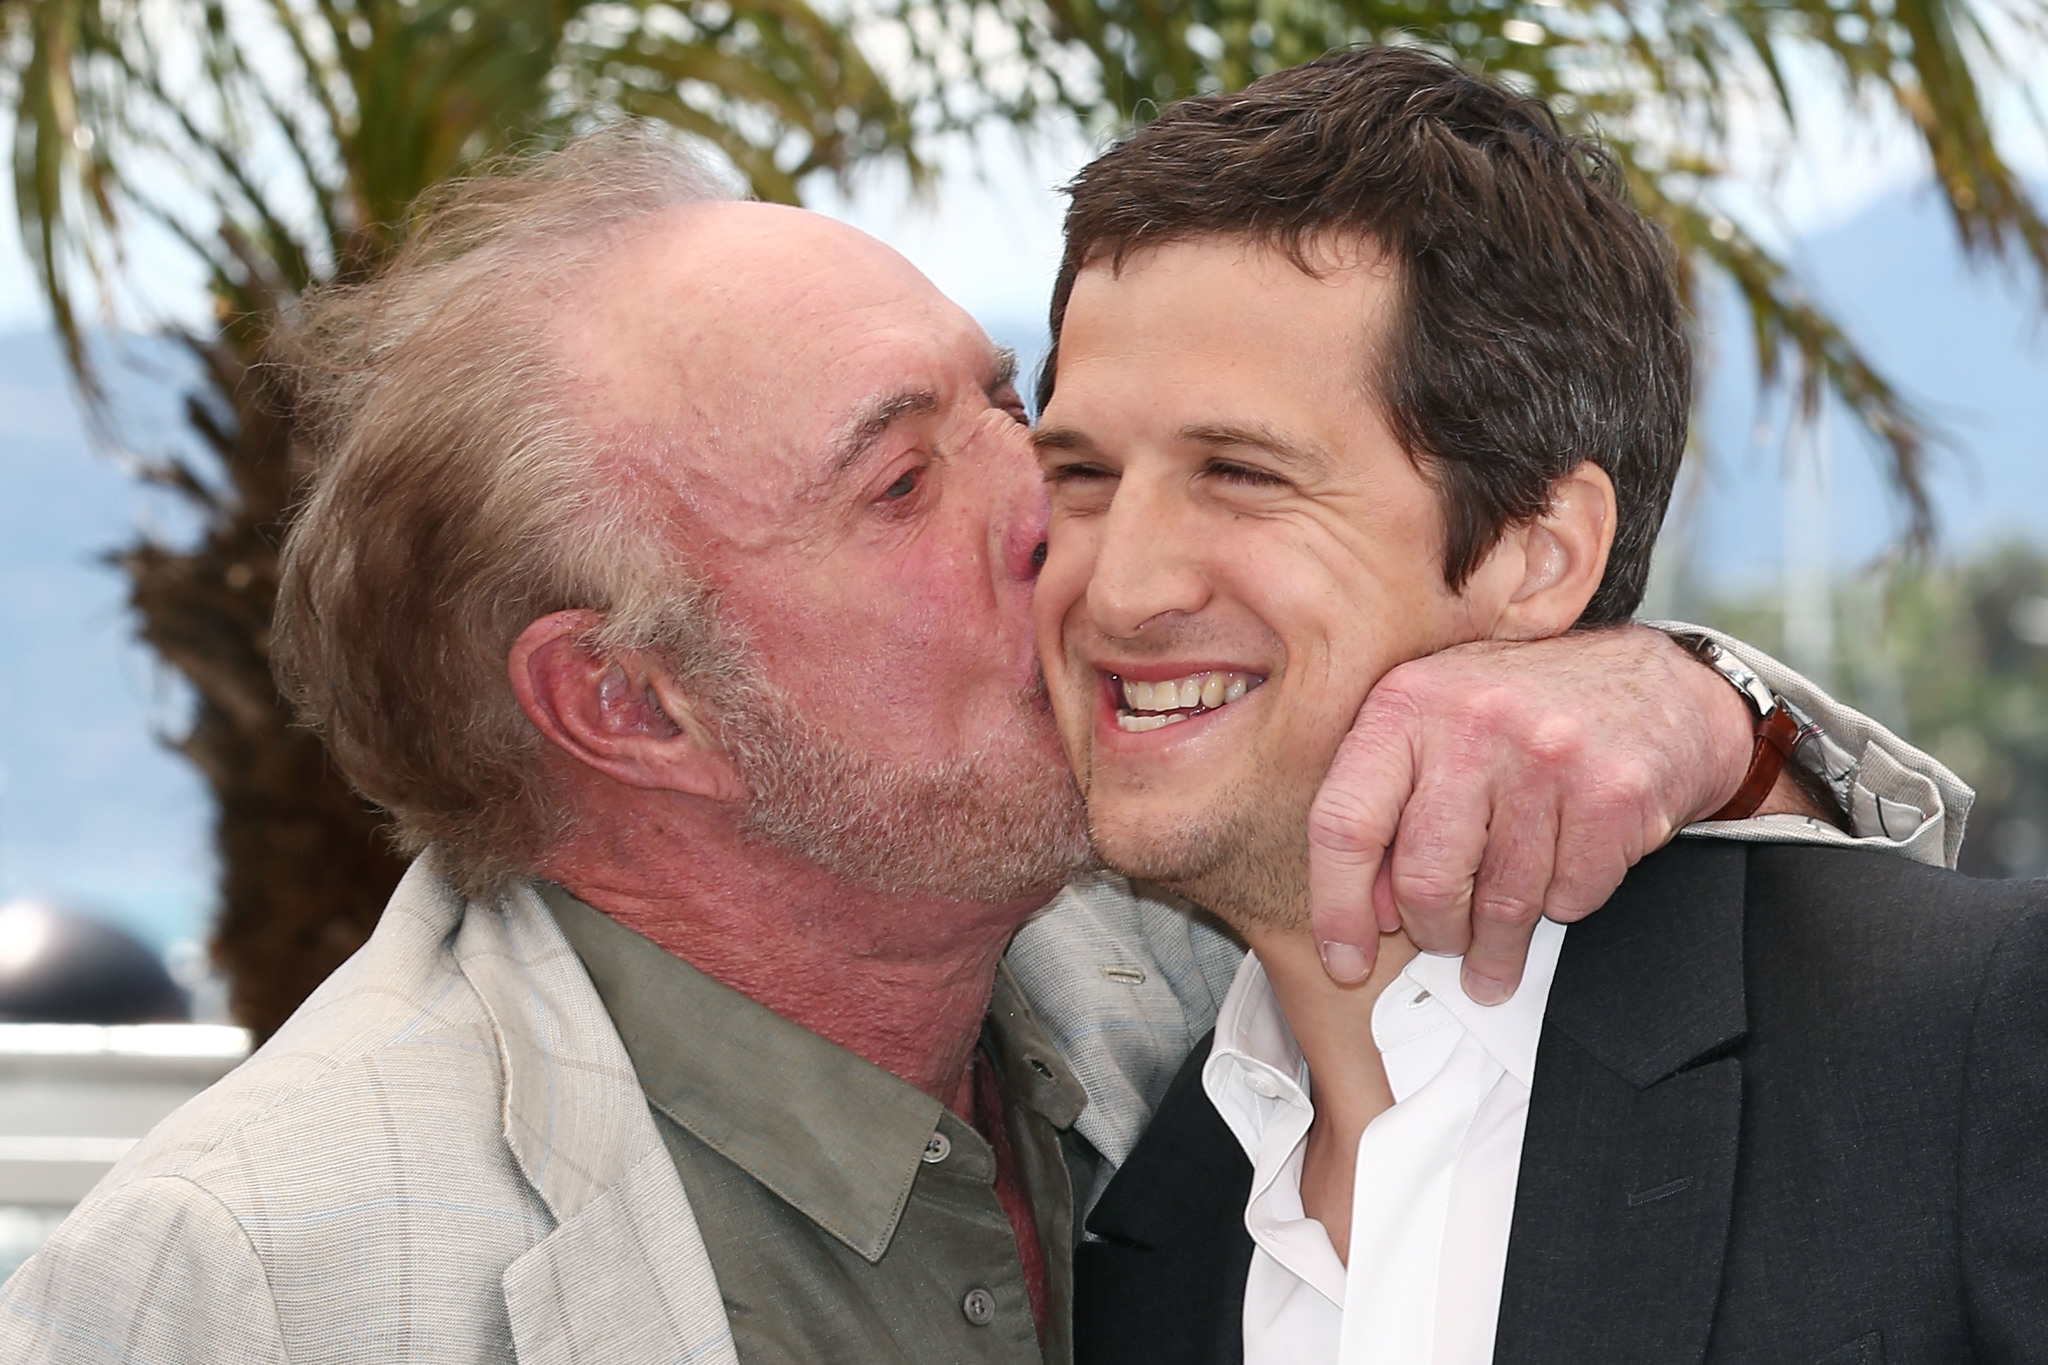 James Caan and Guillaume Canet at event of Blood Ties (2013)